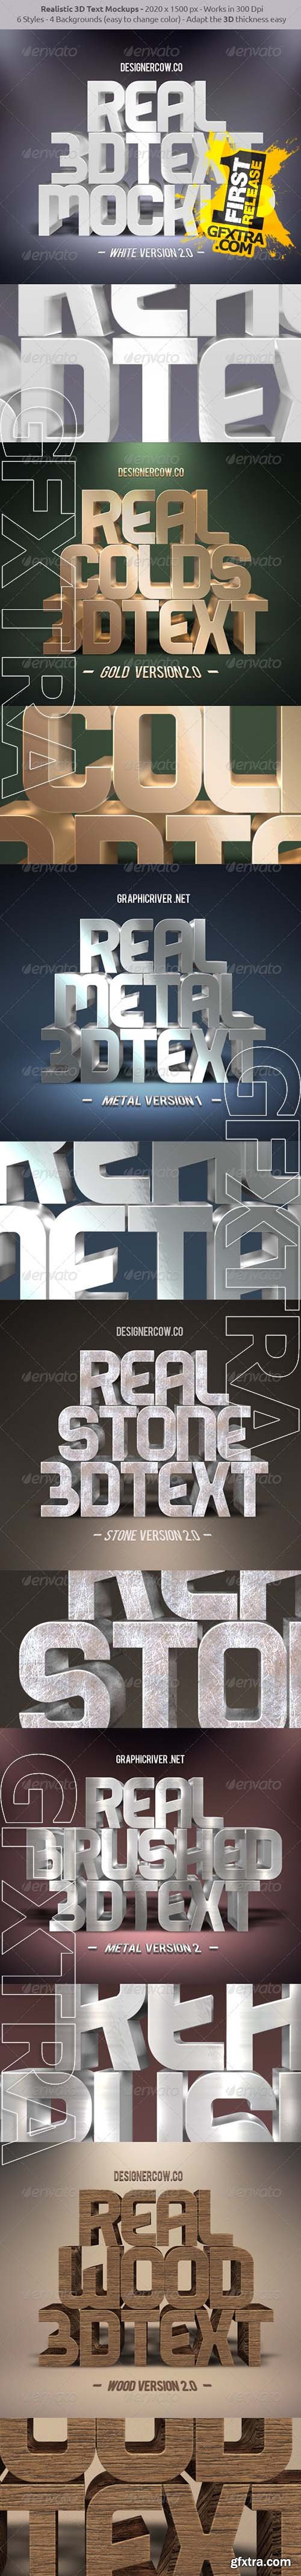 Real 3D Text Mockups - GraphicRiver 8553107